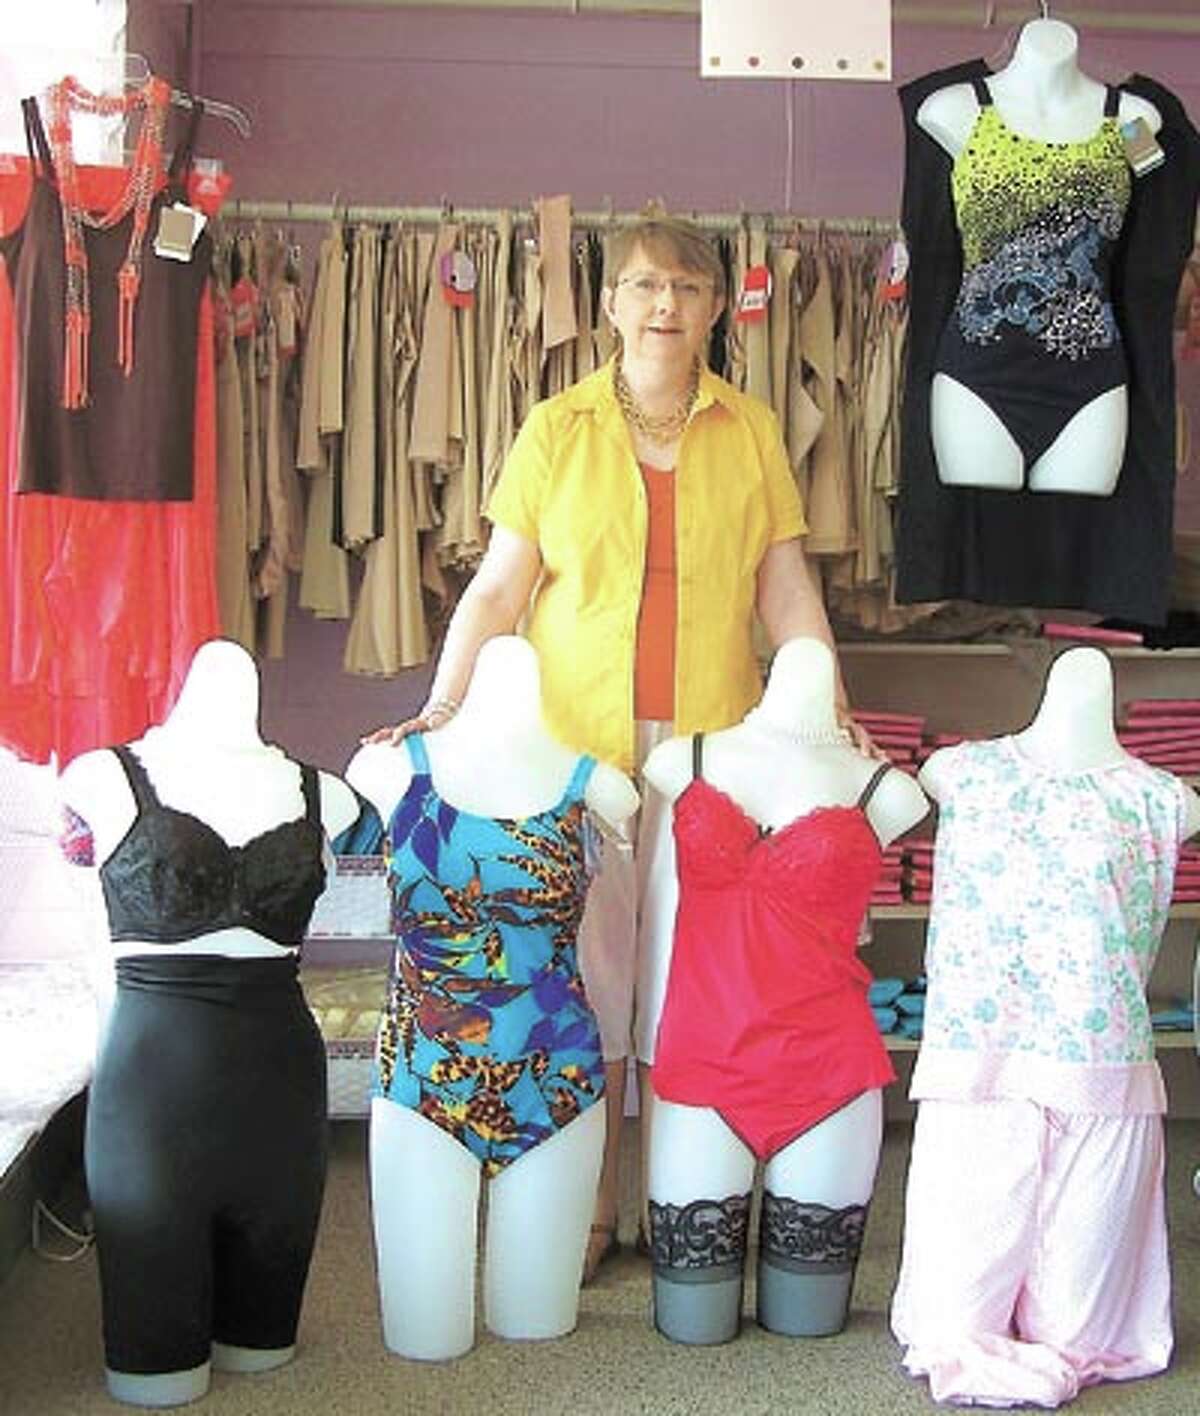 Swimsuits in this year’s fashion colors are ready for you to try on at The Pennyrich Shop, 311 Dodson Street in Old Town Midland.